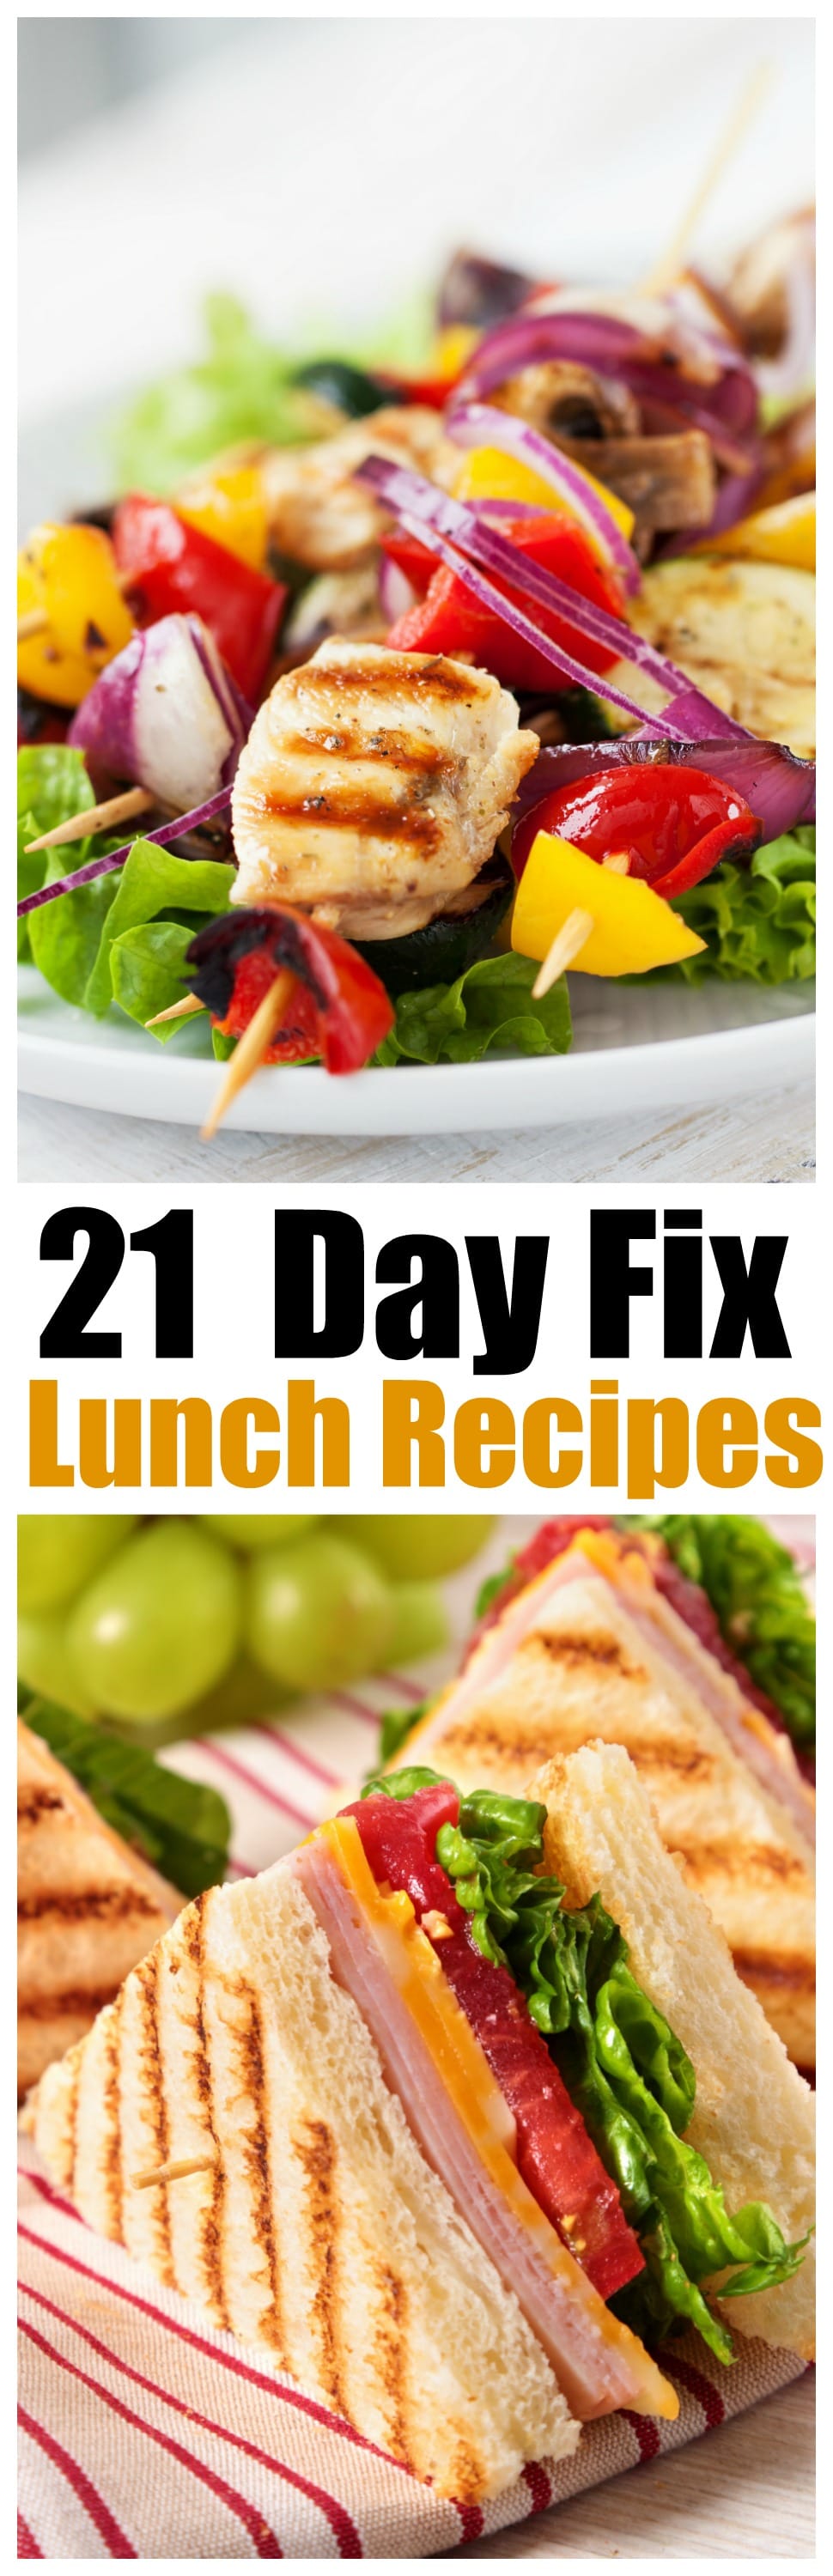 21-Day Fix Lunch Recipes, Get a lunch for Every work day of the month with these 20 21-day fix recipes